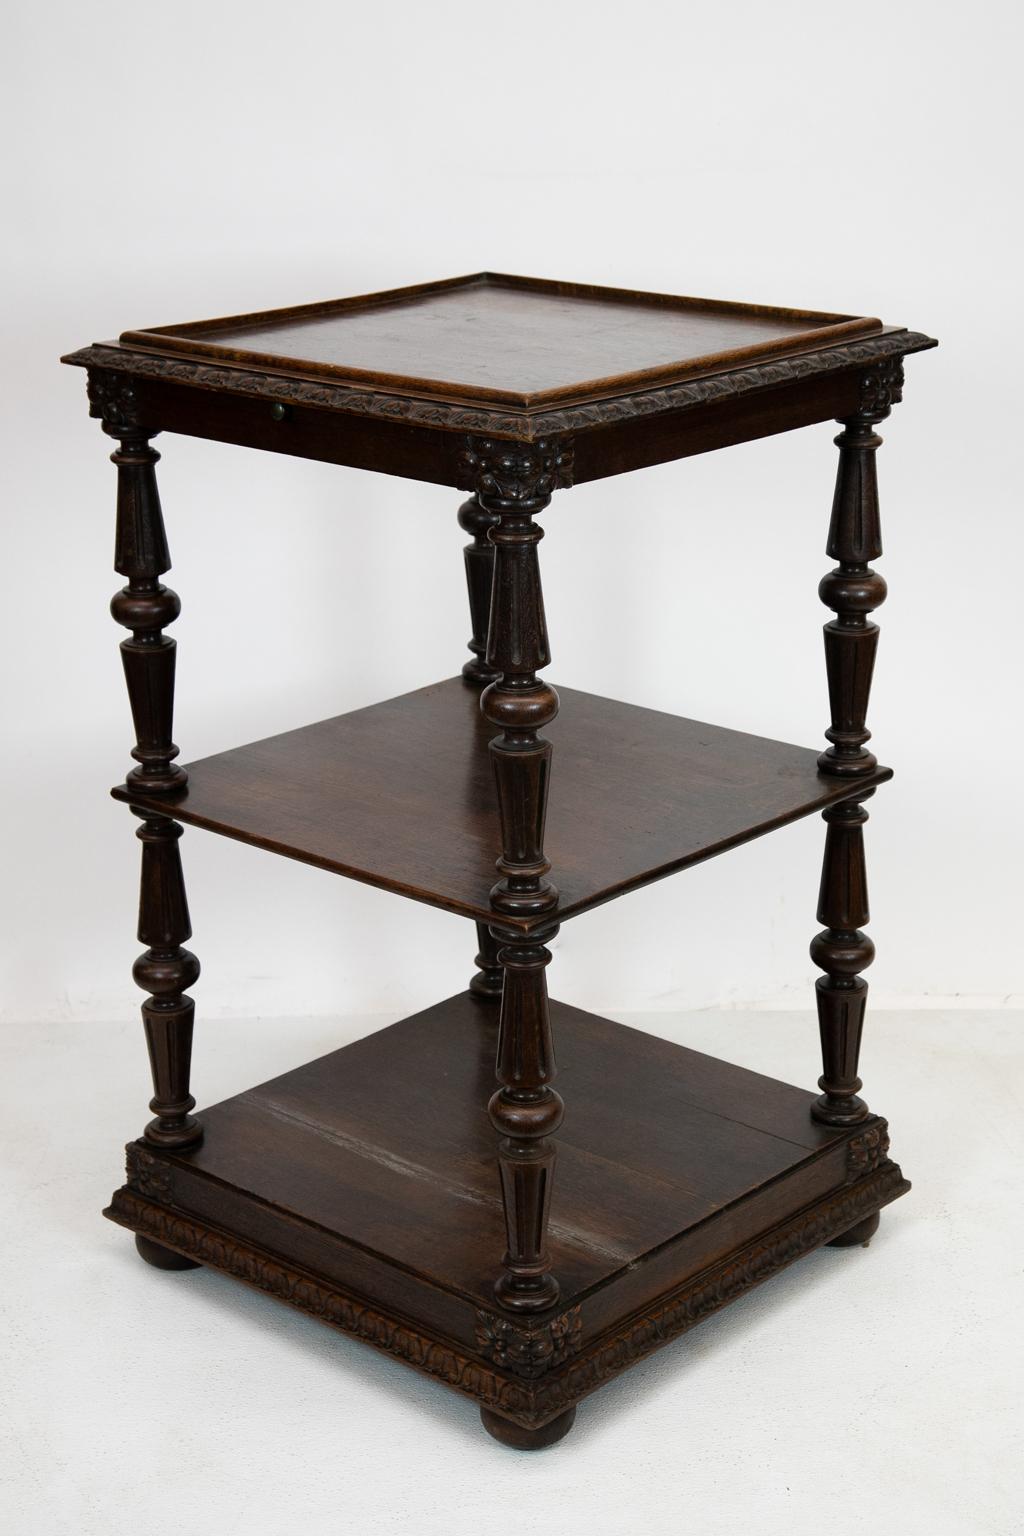 Carved English three-tiered shelf, the top has four sides of carved edge molding with a shallow gallery supported by turned fluted columns, with a pull out shelf under the top.